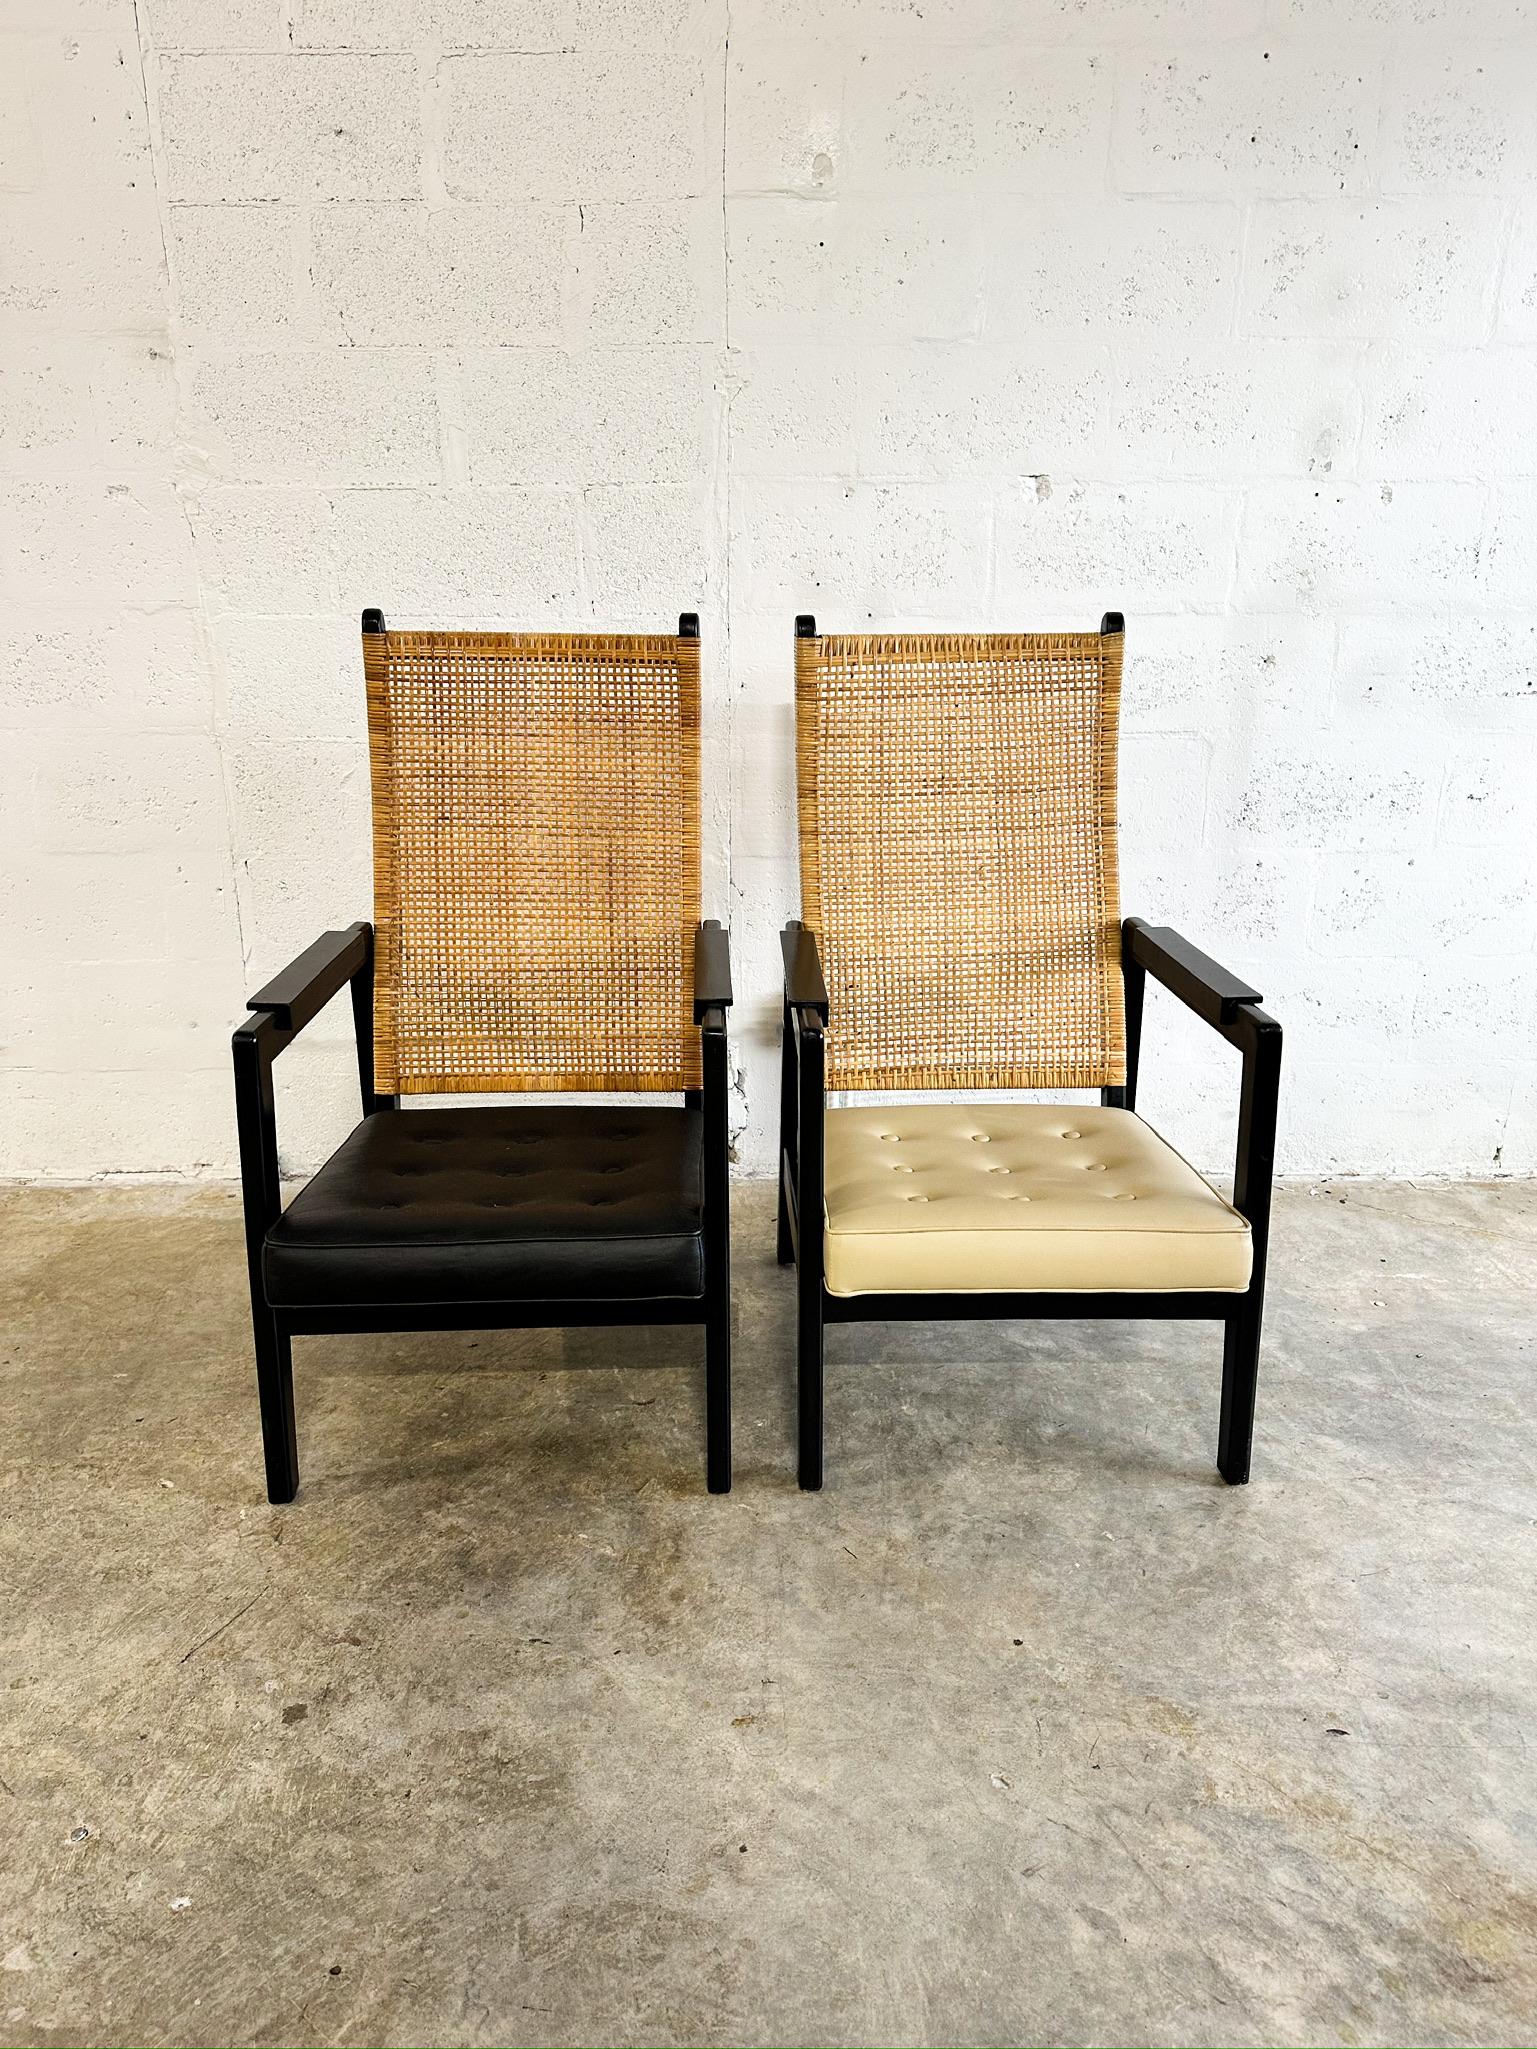 Rattan Highback Lounge Chairs by P.J. Muntendam for Jonkers, Netherlands. One beige and one black. 22.25w 28d 40.5h 15seat